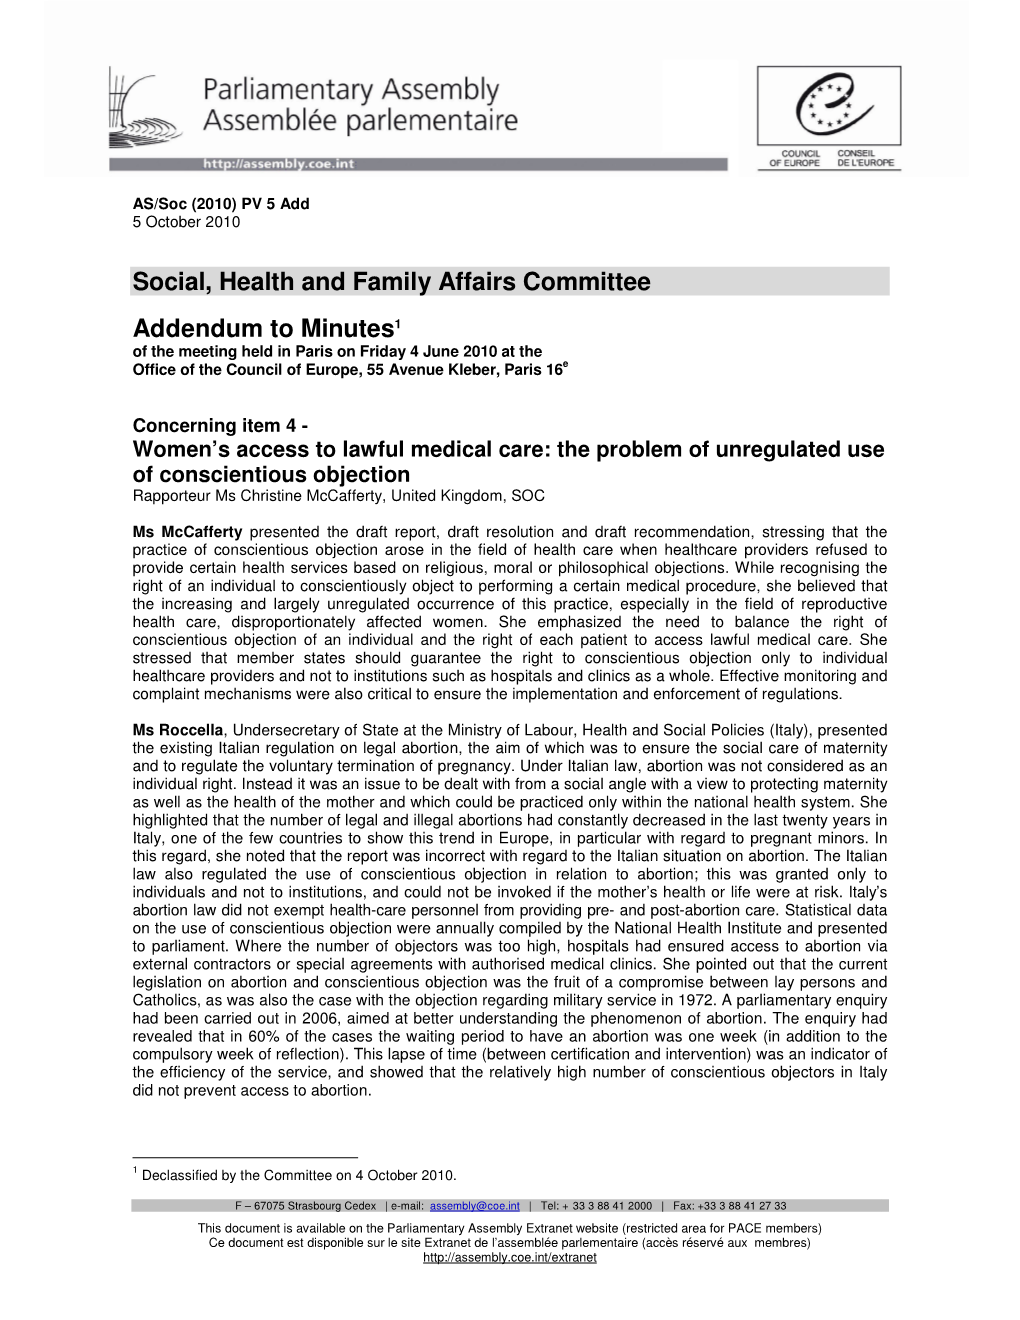 Social, Health and Family Affairs Committee Addendum to Minutes1